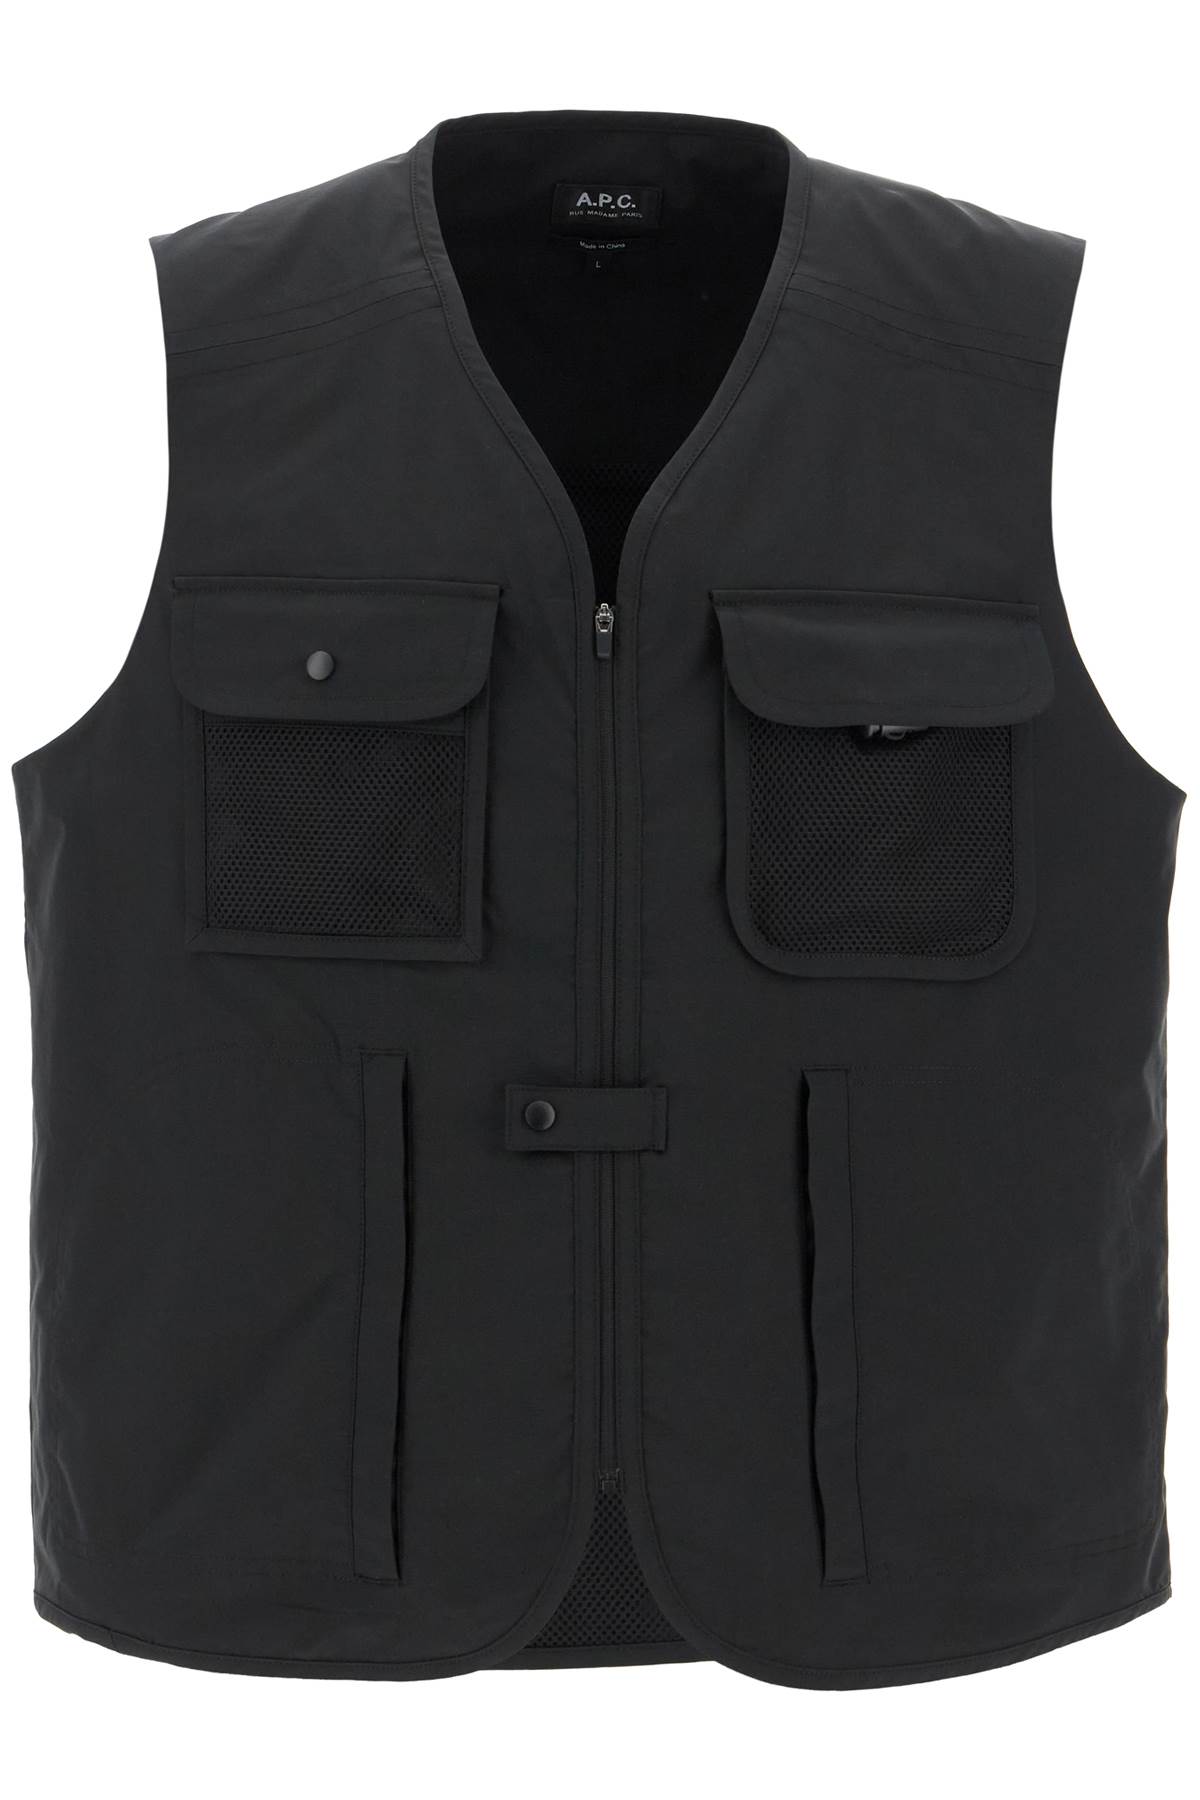 A. P.C. alban Technical Fabric Vest For